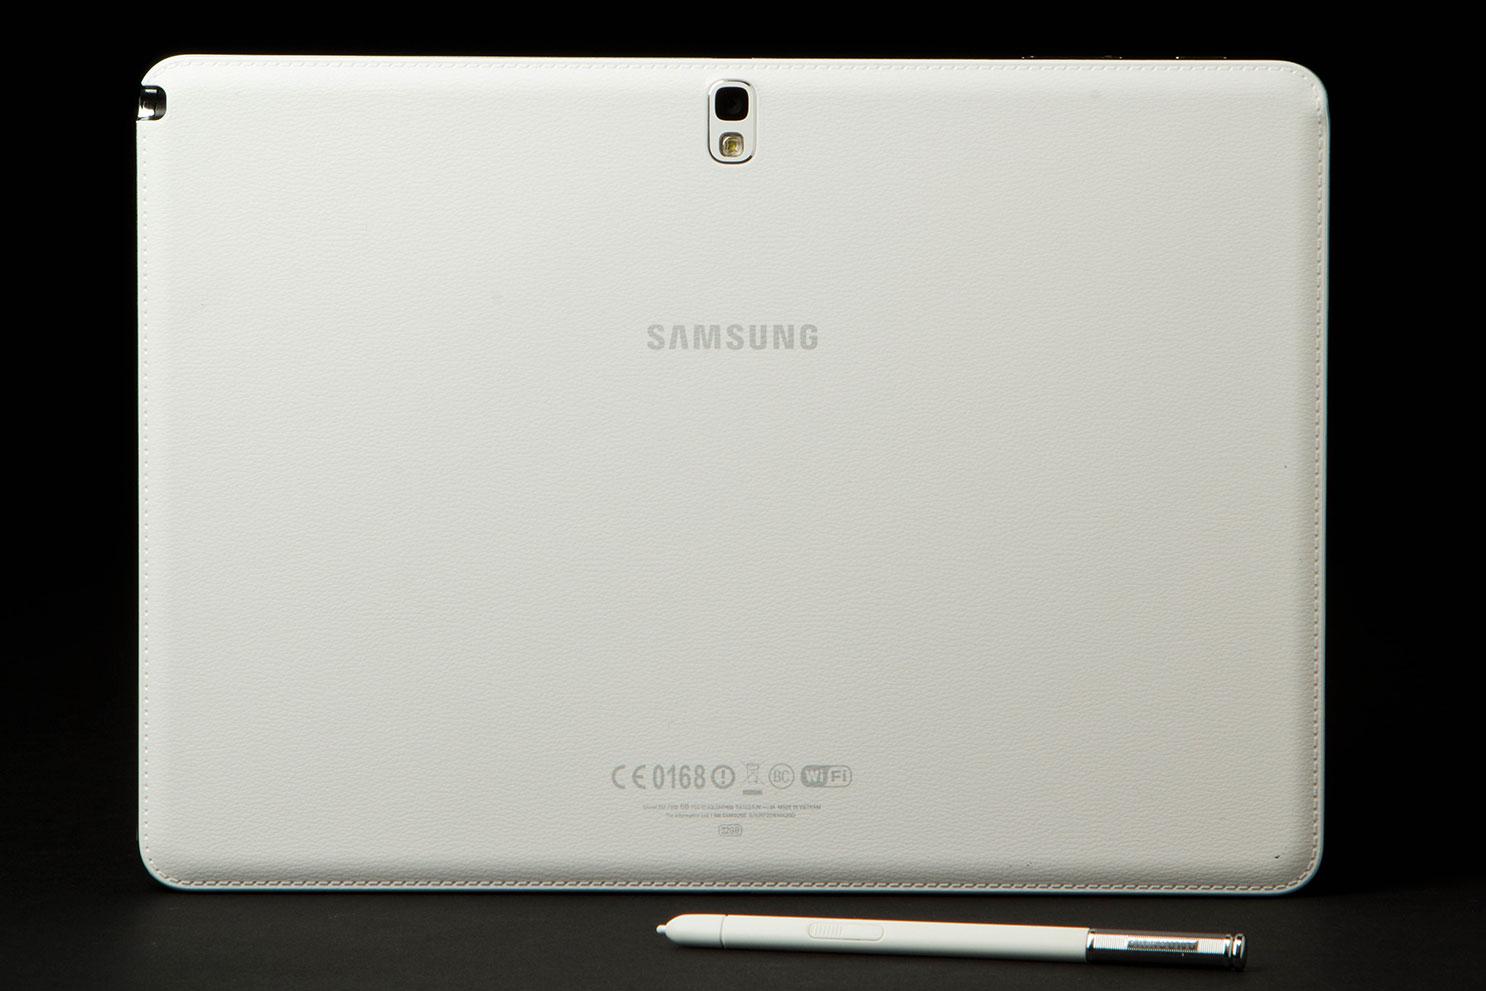 Samsung Galaxy Note 10.1 (2014 Edition) review: Top-notch specs on a pricey  niche tablet - CNET